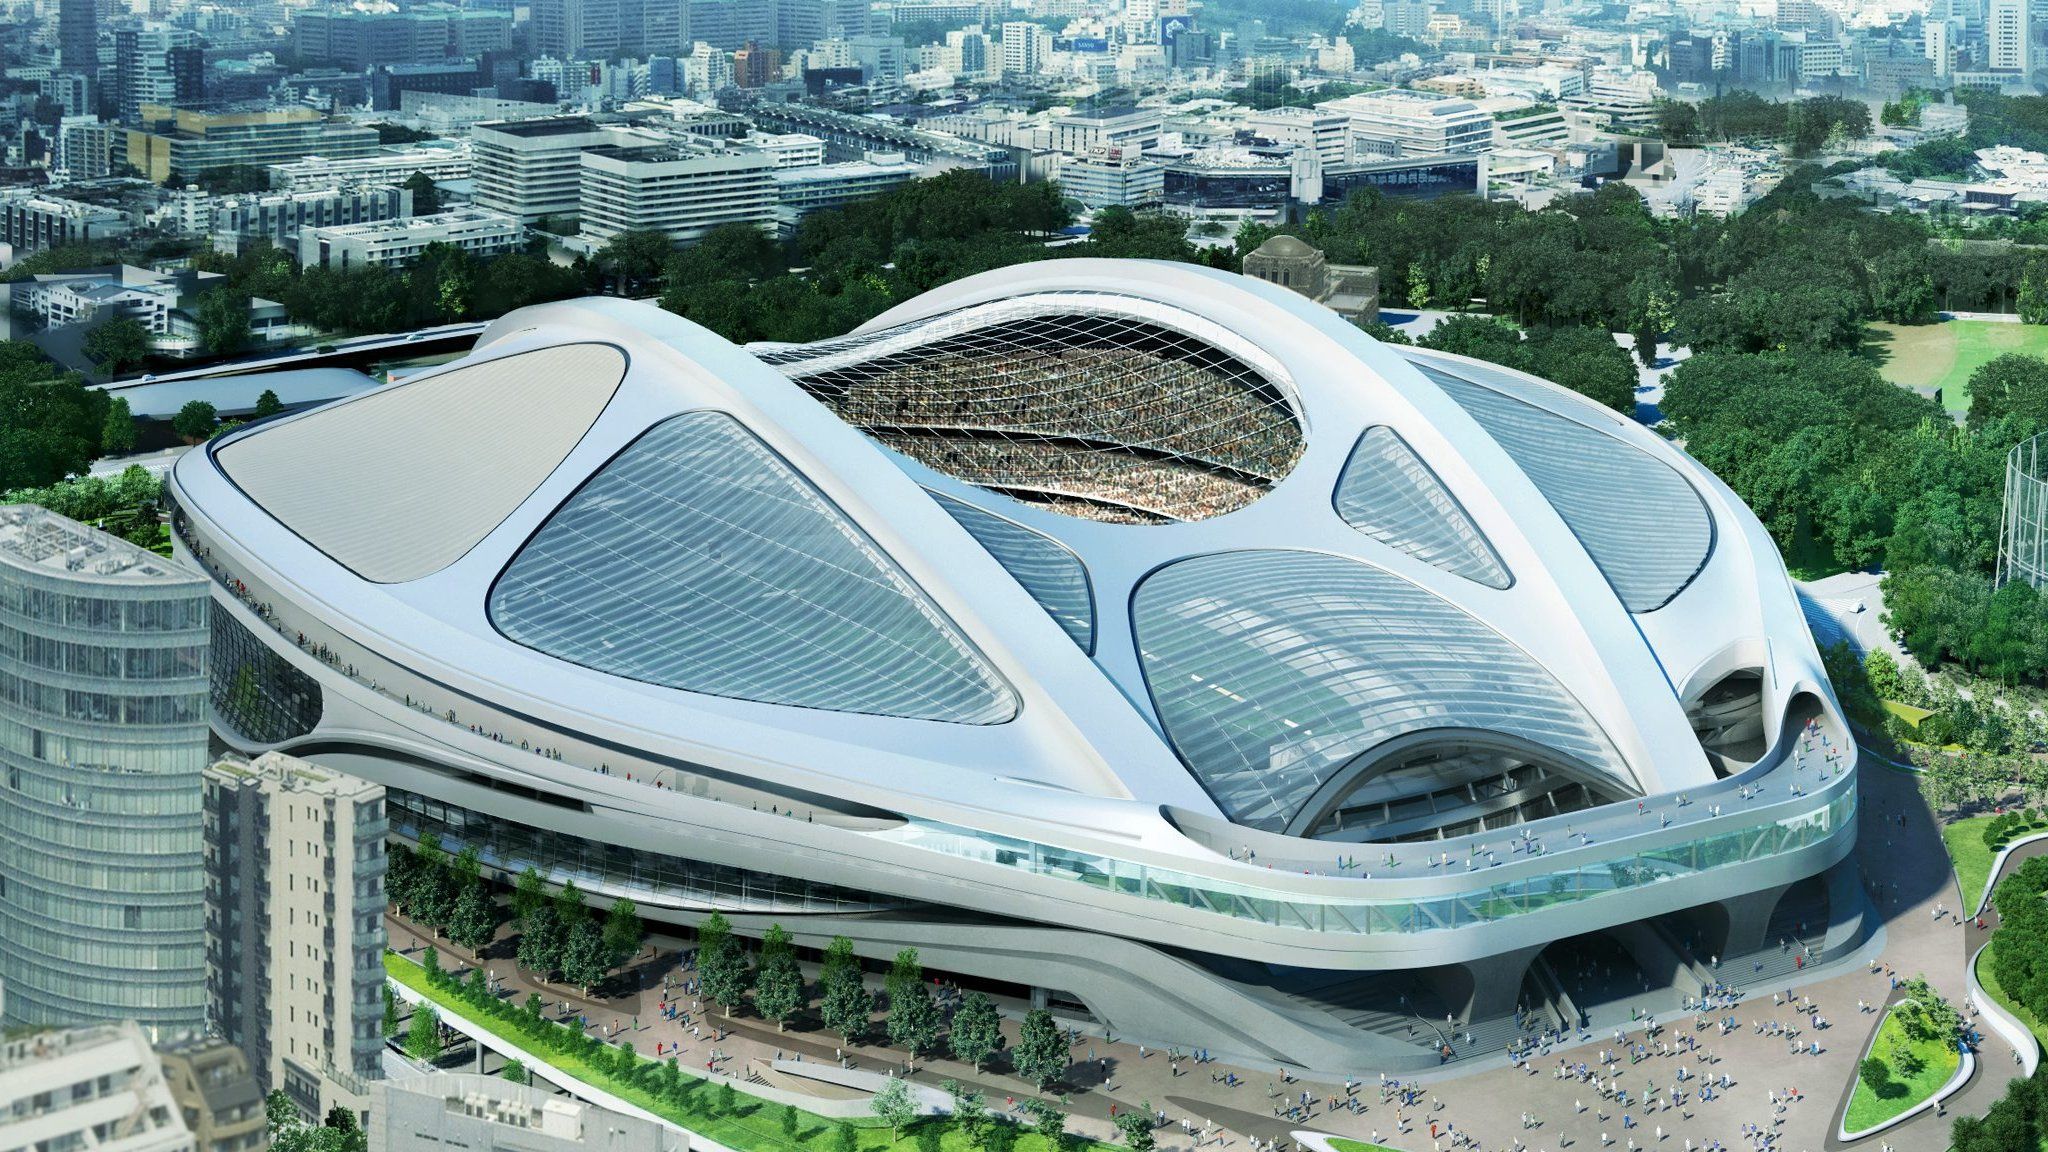 File photo: An undated handout image released by Japan Sport Council on 17 July 2015 shows an artist's concept image of the new National Stadium for 2020 Tokyo Olympics designed by Iraqi-British architect Zaha Hadid